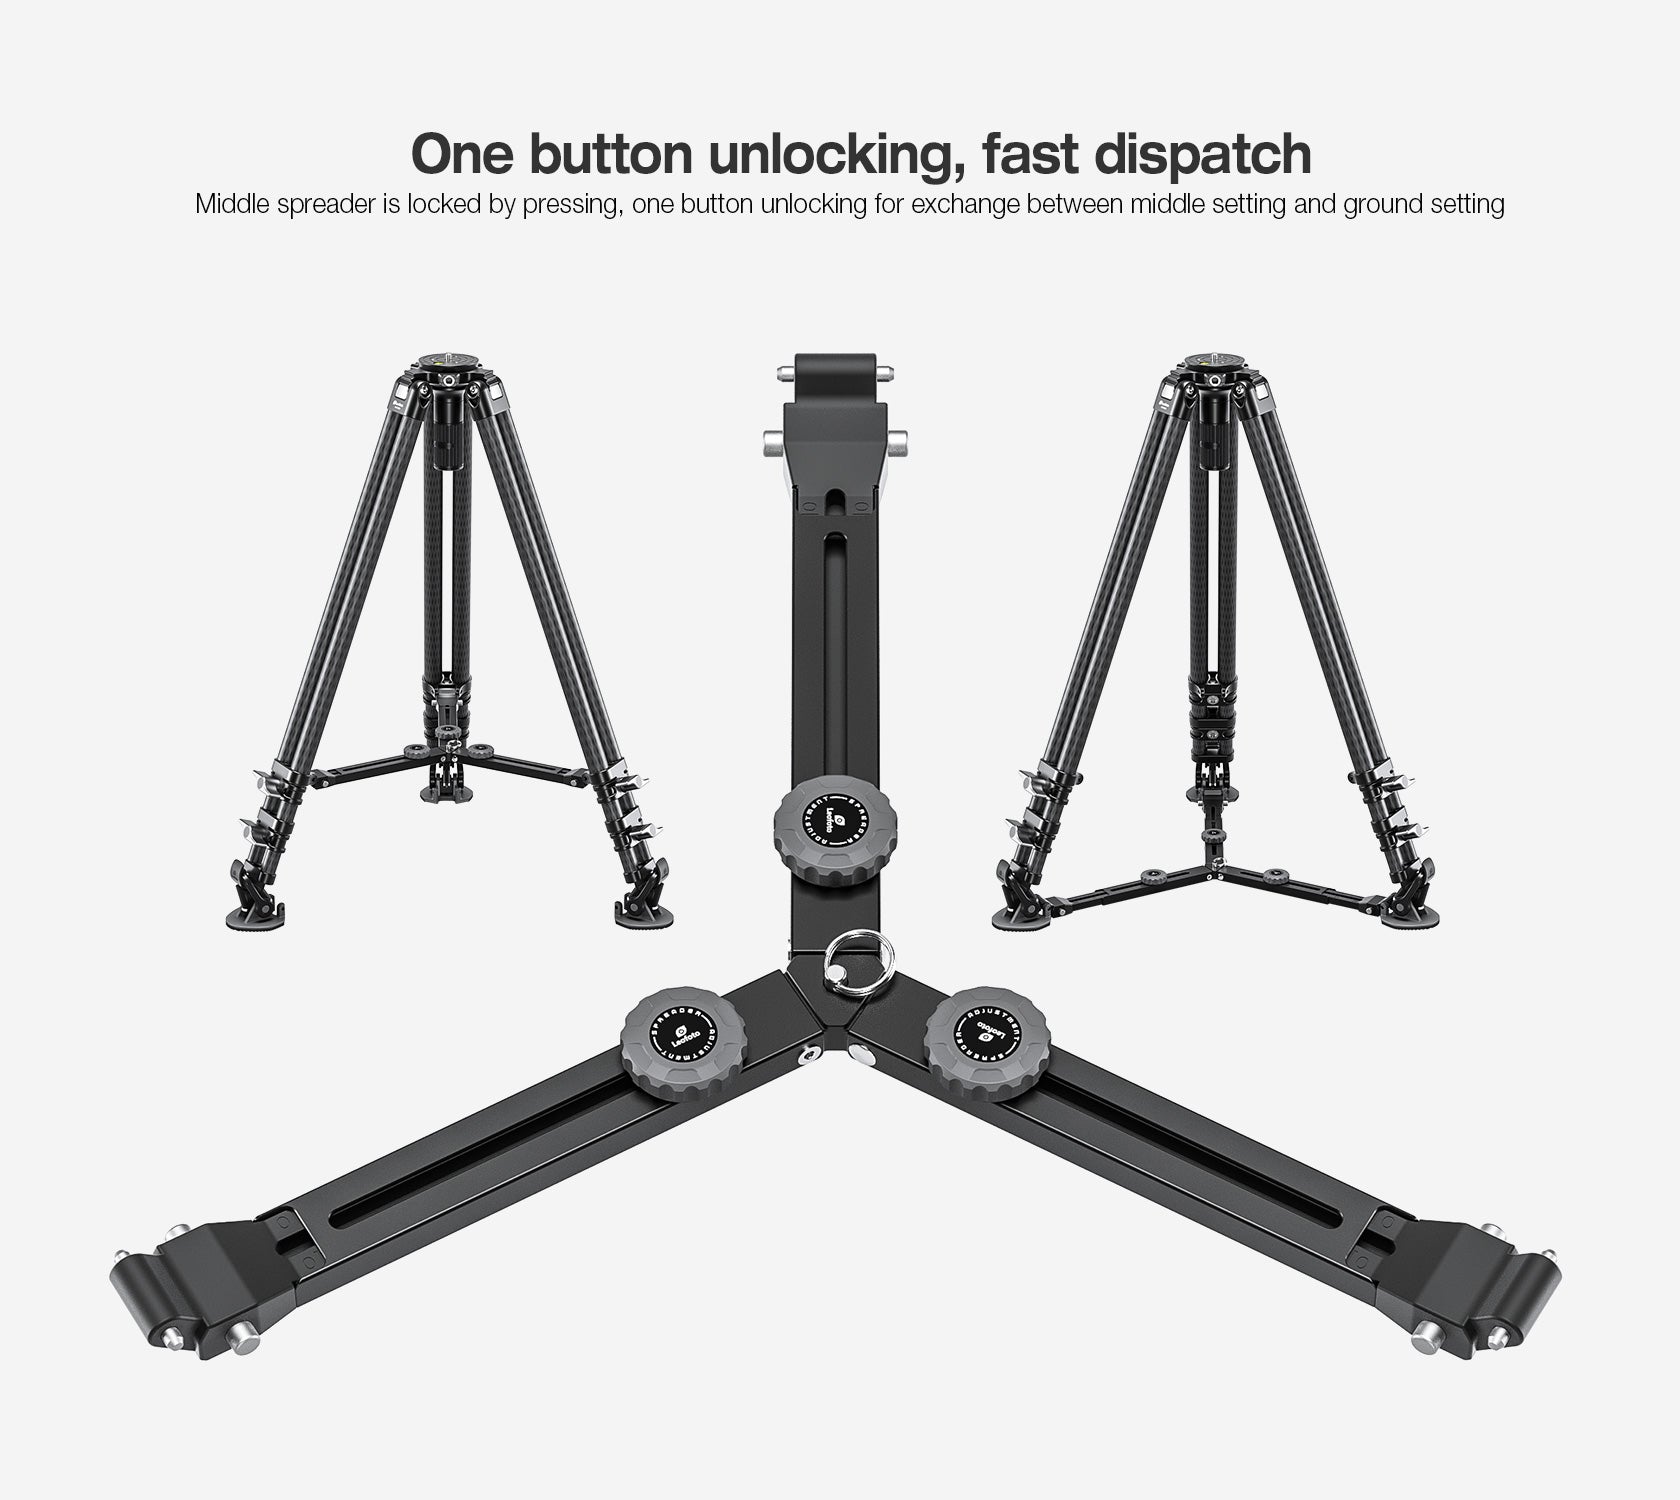 Leofoto LVC-193C+BV-10 Dual-Tube Video Tripod with Fluid Head Set  | 75mm Integrated Bowl with Leveling Base and Handle